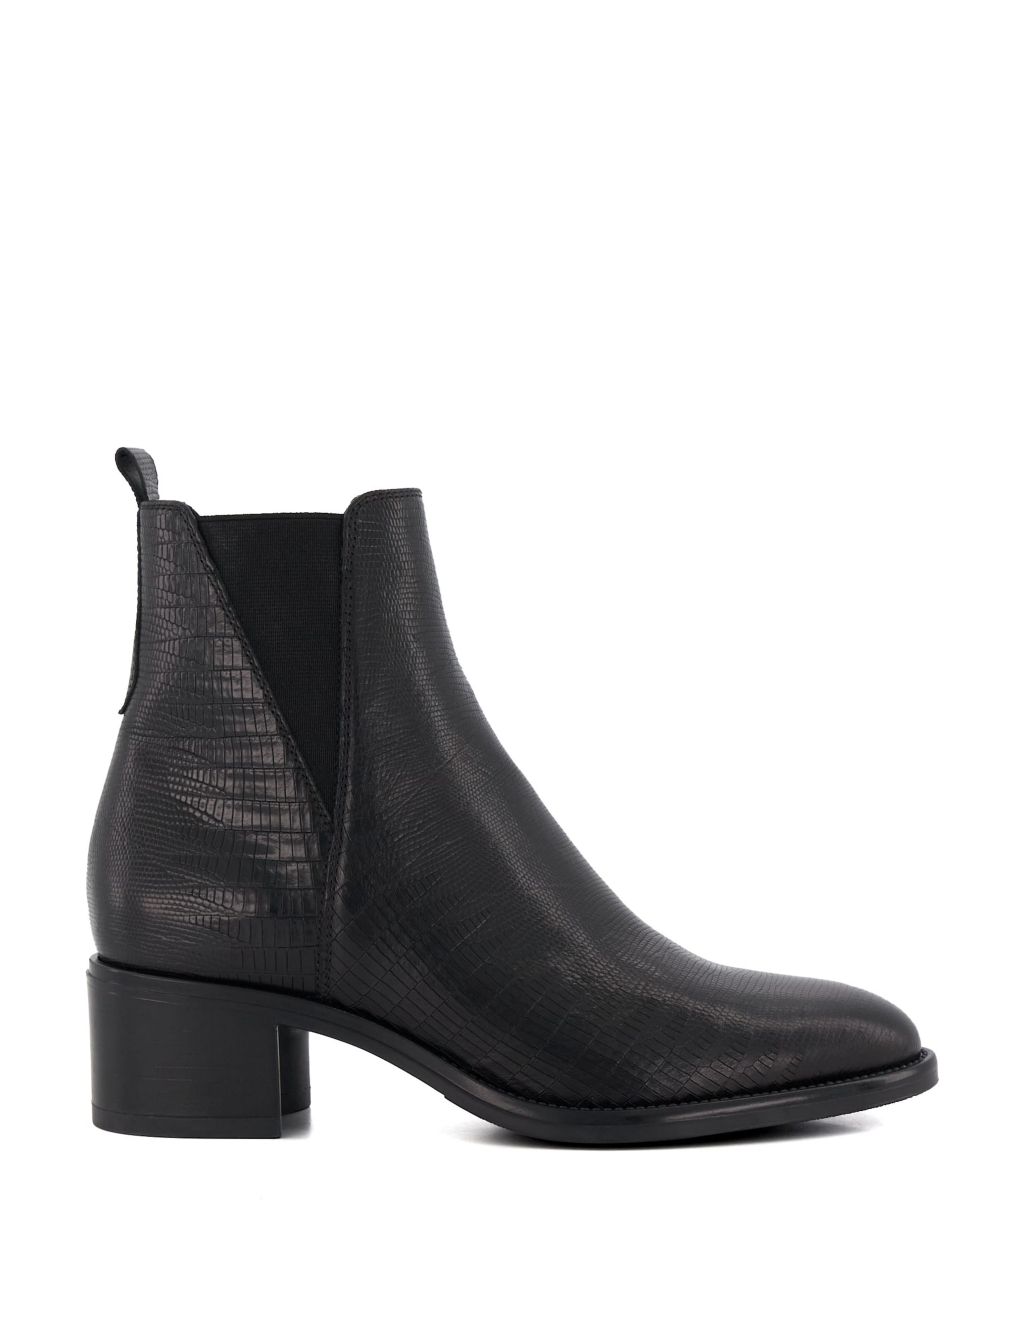 Leather Block Heel Ankle Boots image 1